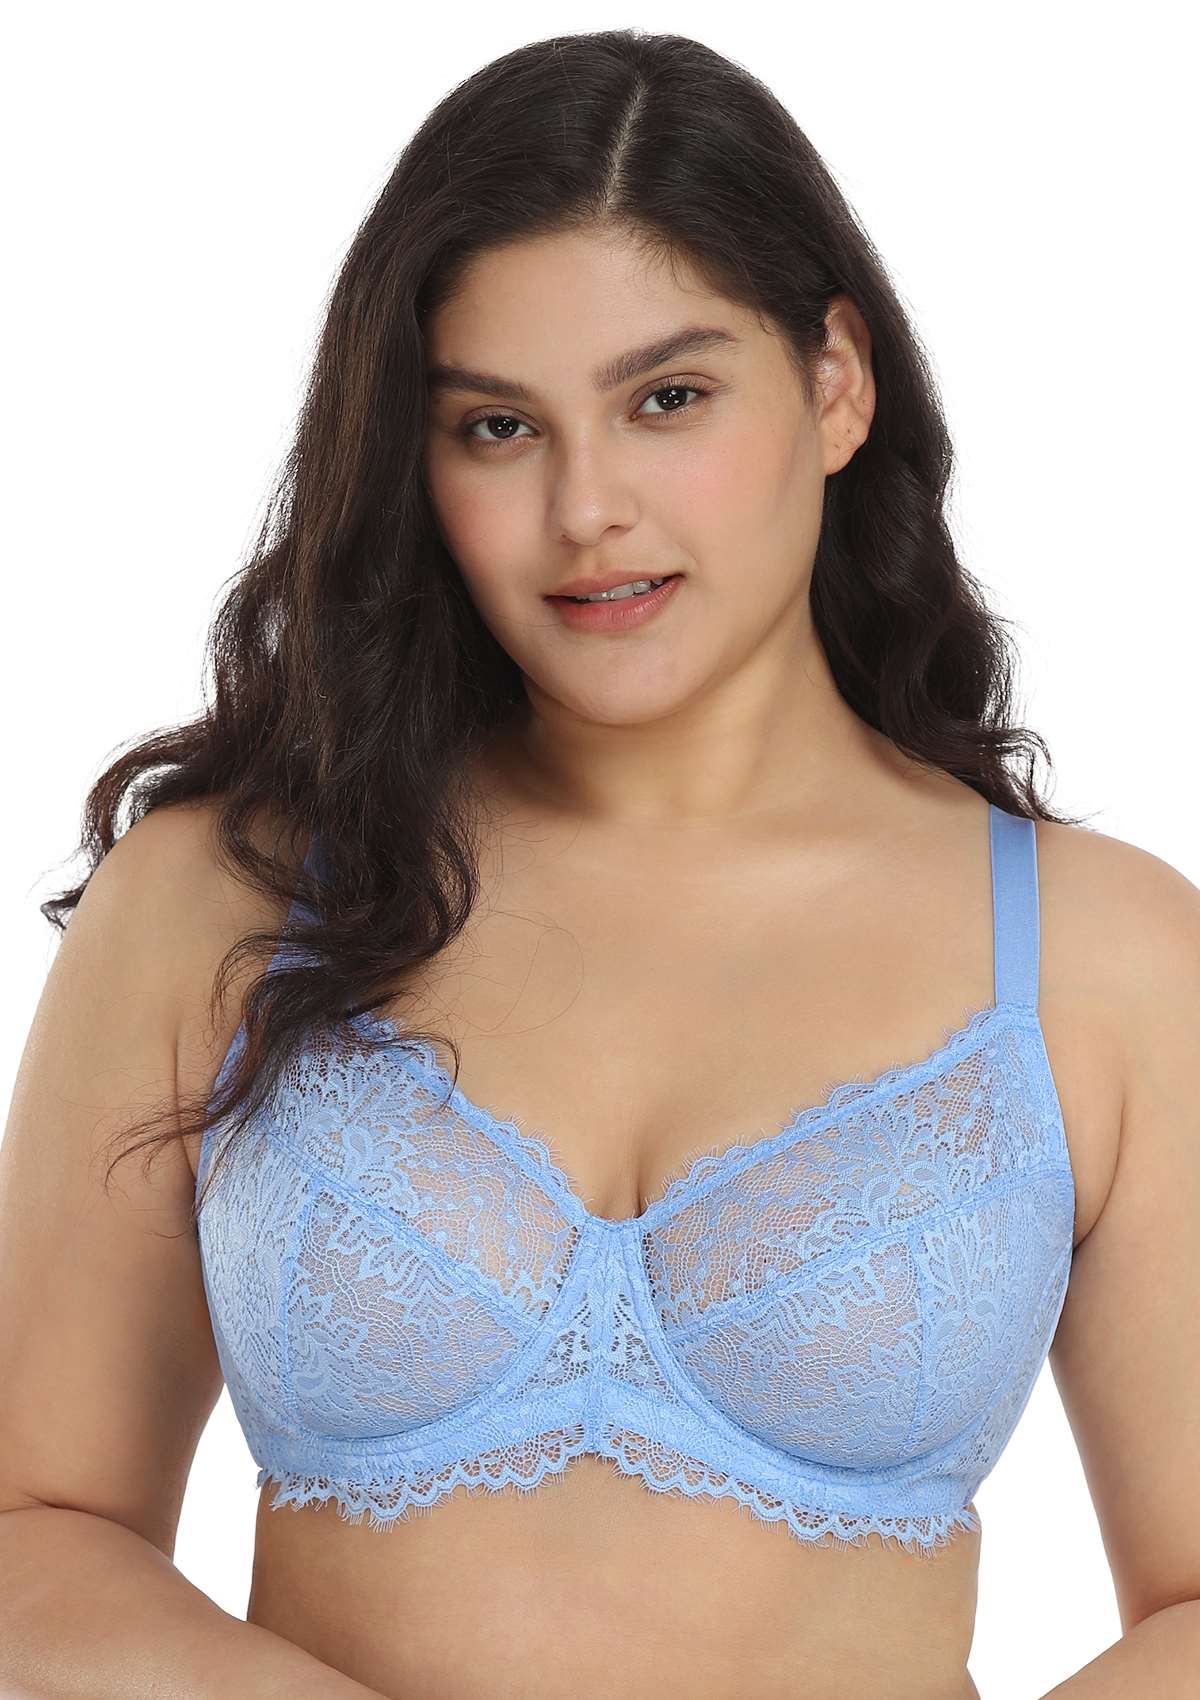 HSIA Sunflower Unlined Lace Bra: Best Bra For Wide Set Breasts - Sky Blue / 36 / I